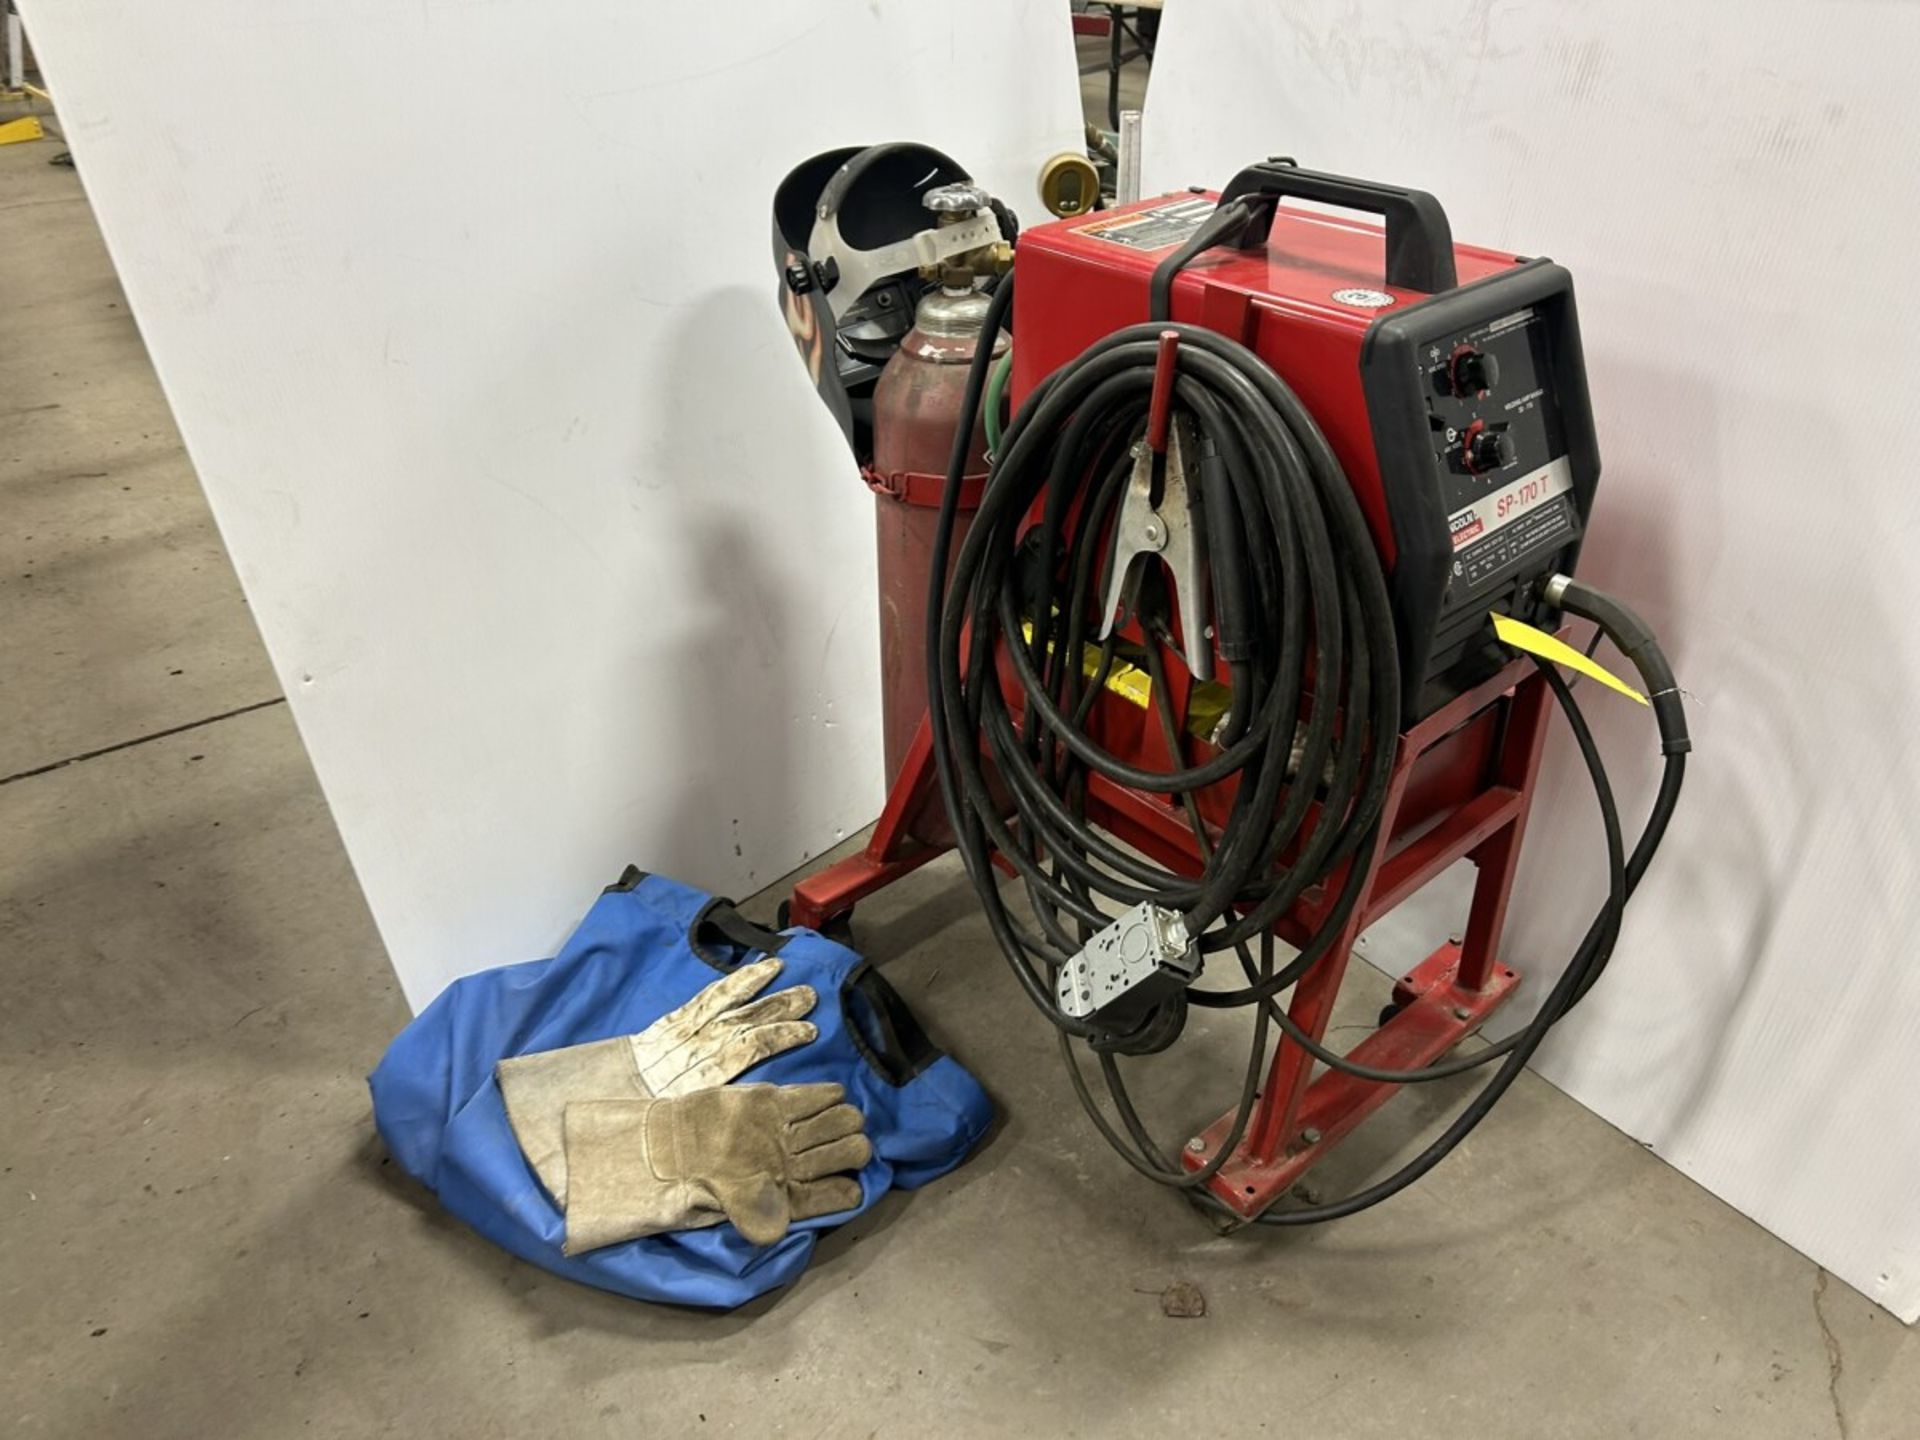 LINCOLN ELECTRIC SP-170T MIG WELDING POWER SOURCE W/ CABLES, CART AND BOTTLE S/N 10261-U1970905182